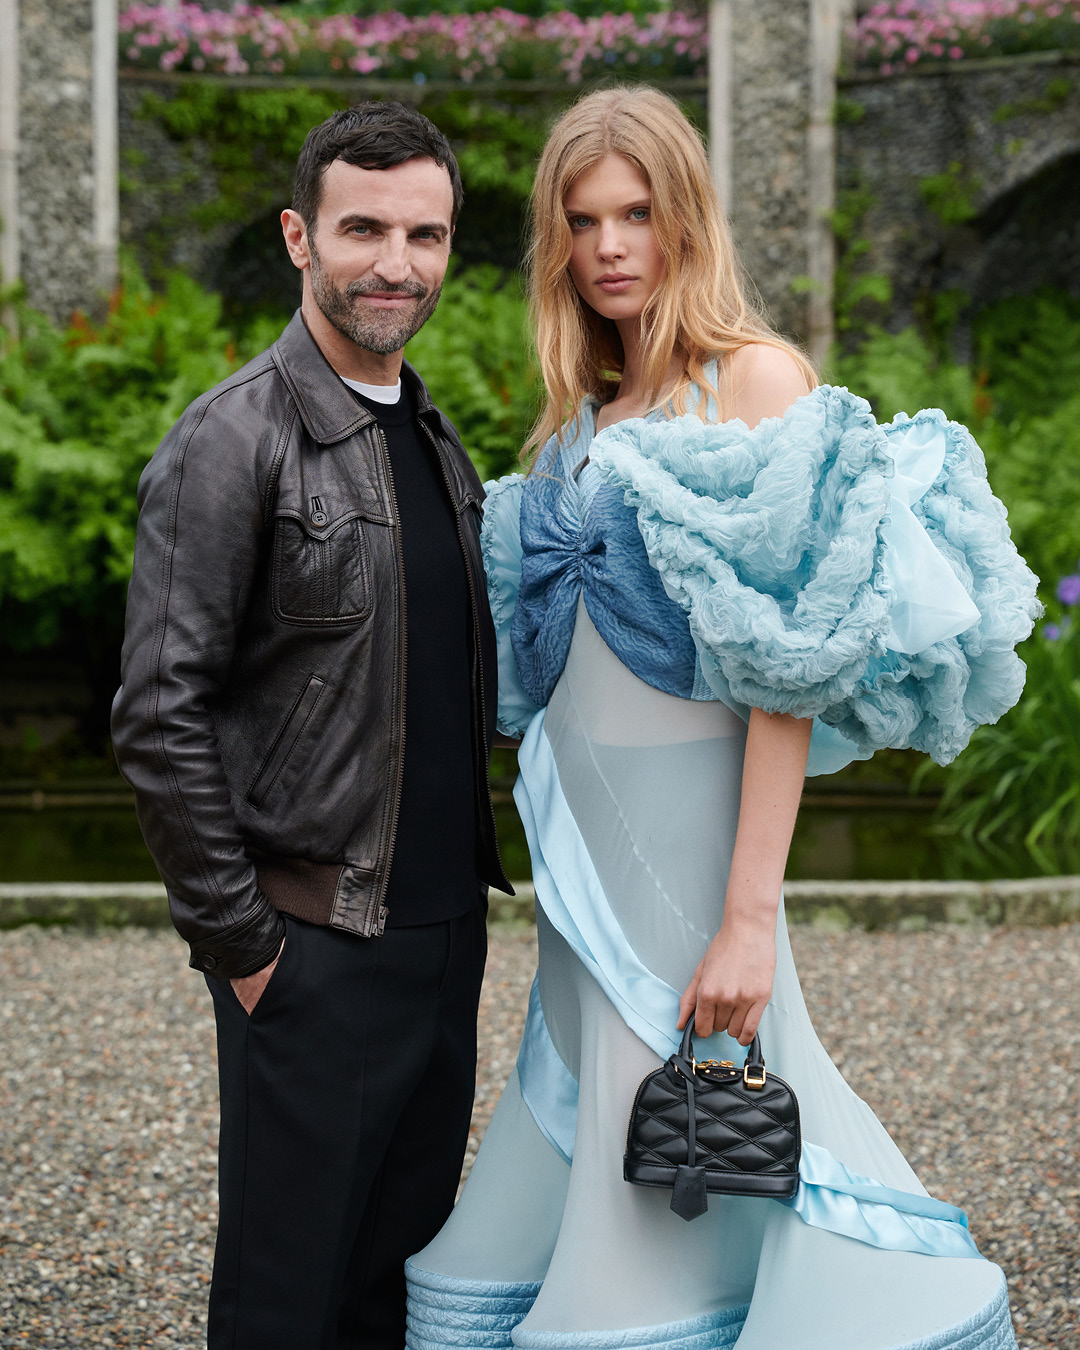 Louis Vuitton on X: #LVCRUISE24 Women's Cruise 2024 Show. @TWNGhesquiere  with model #IdaHeiner for his first collection showcased in Italy, on Isola  Bella in Lake Maggiore. Watch the full show at